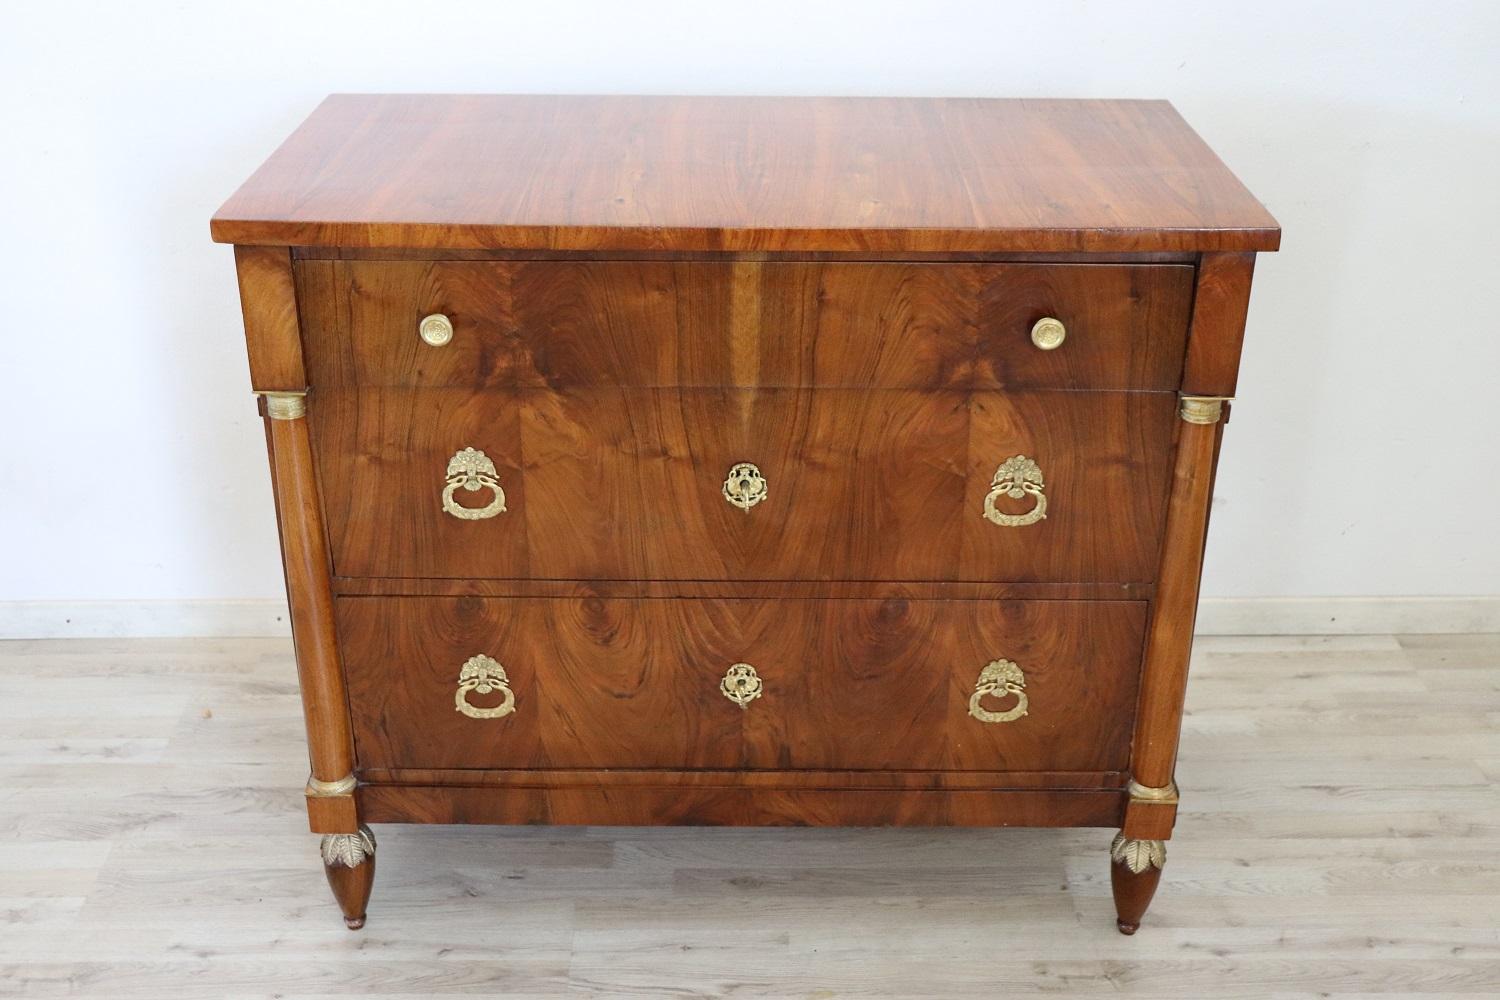 Italian 19th Century Empire Walnut Wood Commode or Chest of Drawers